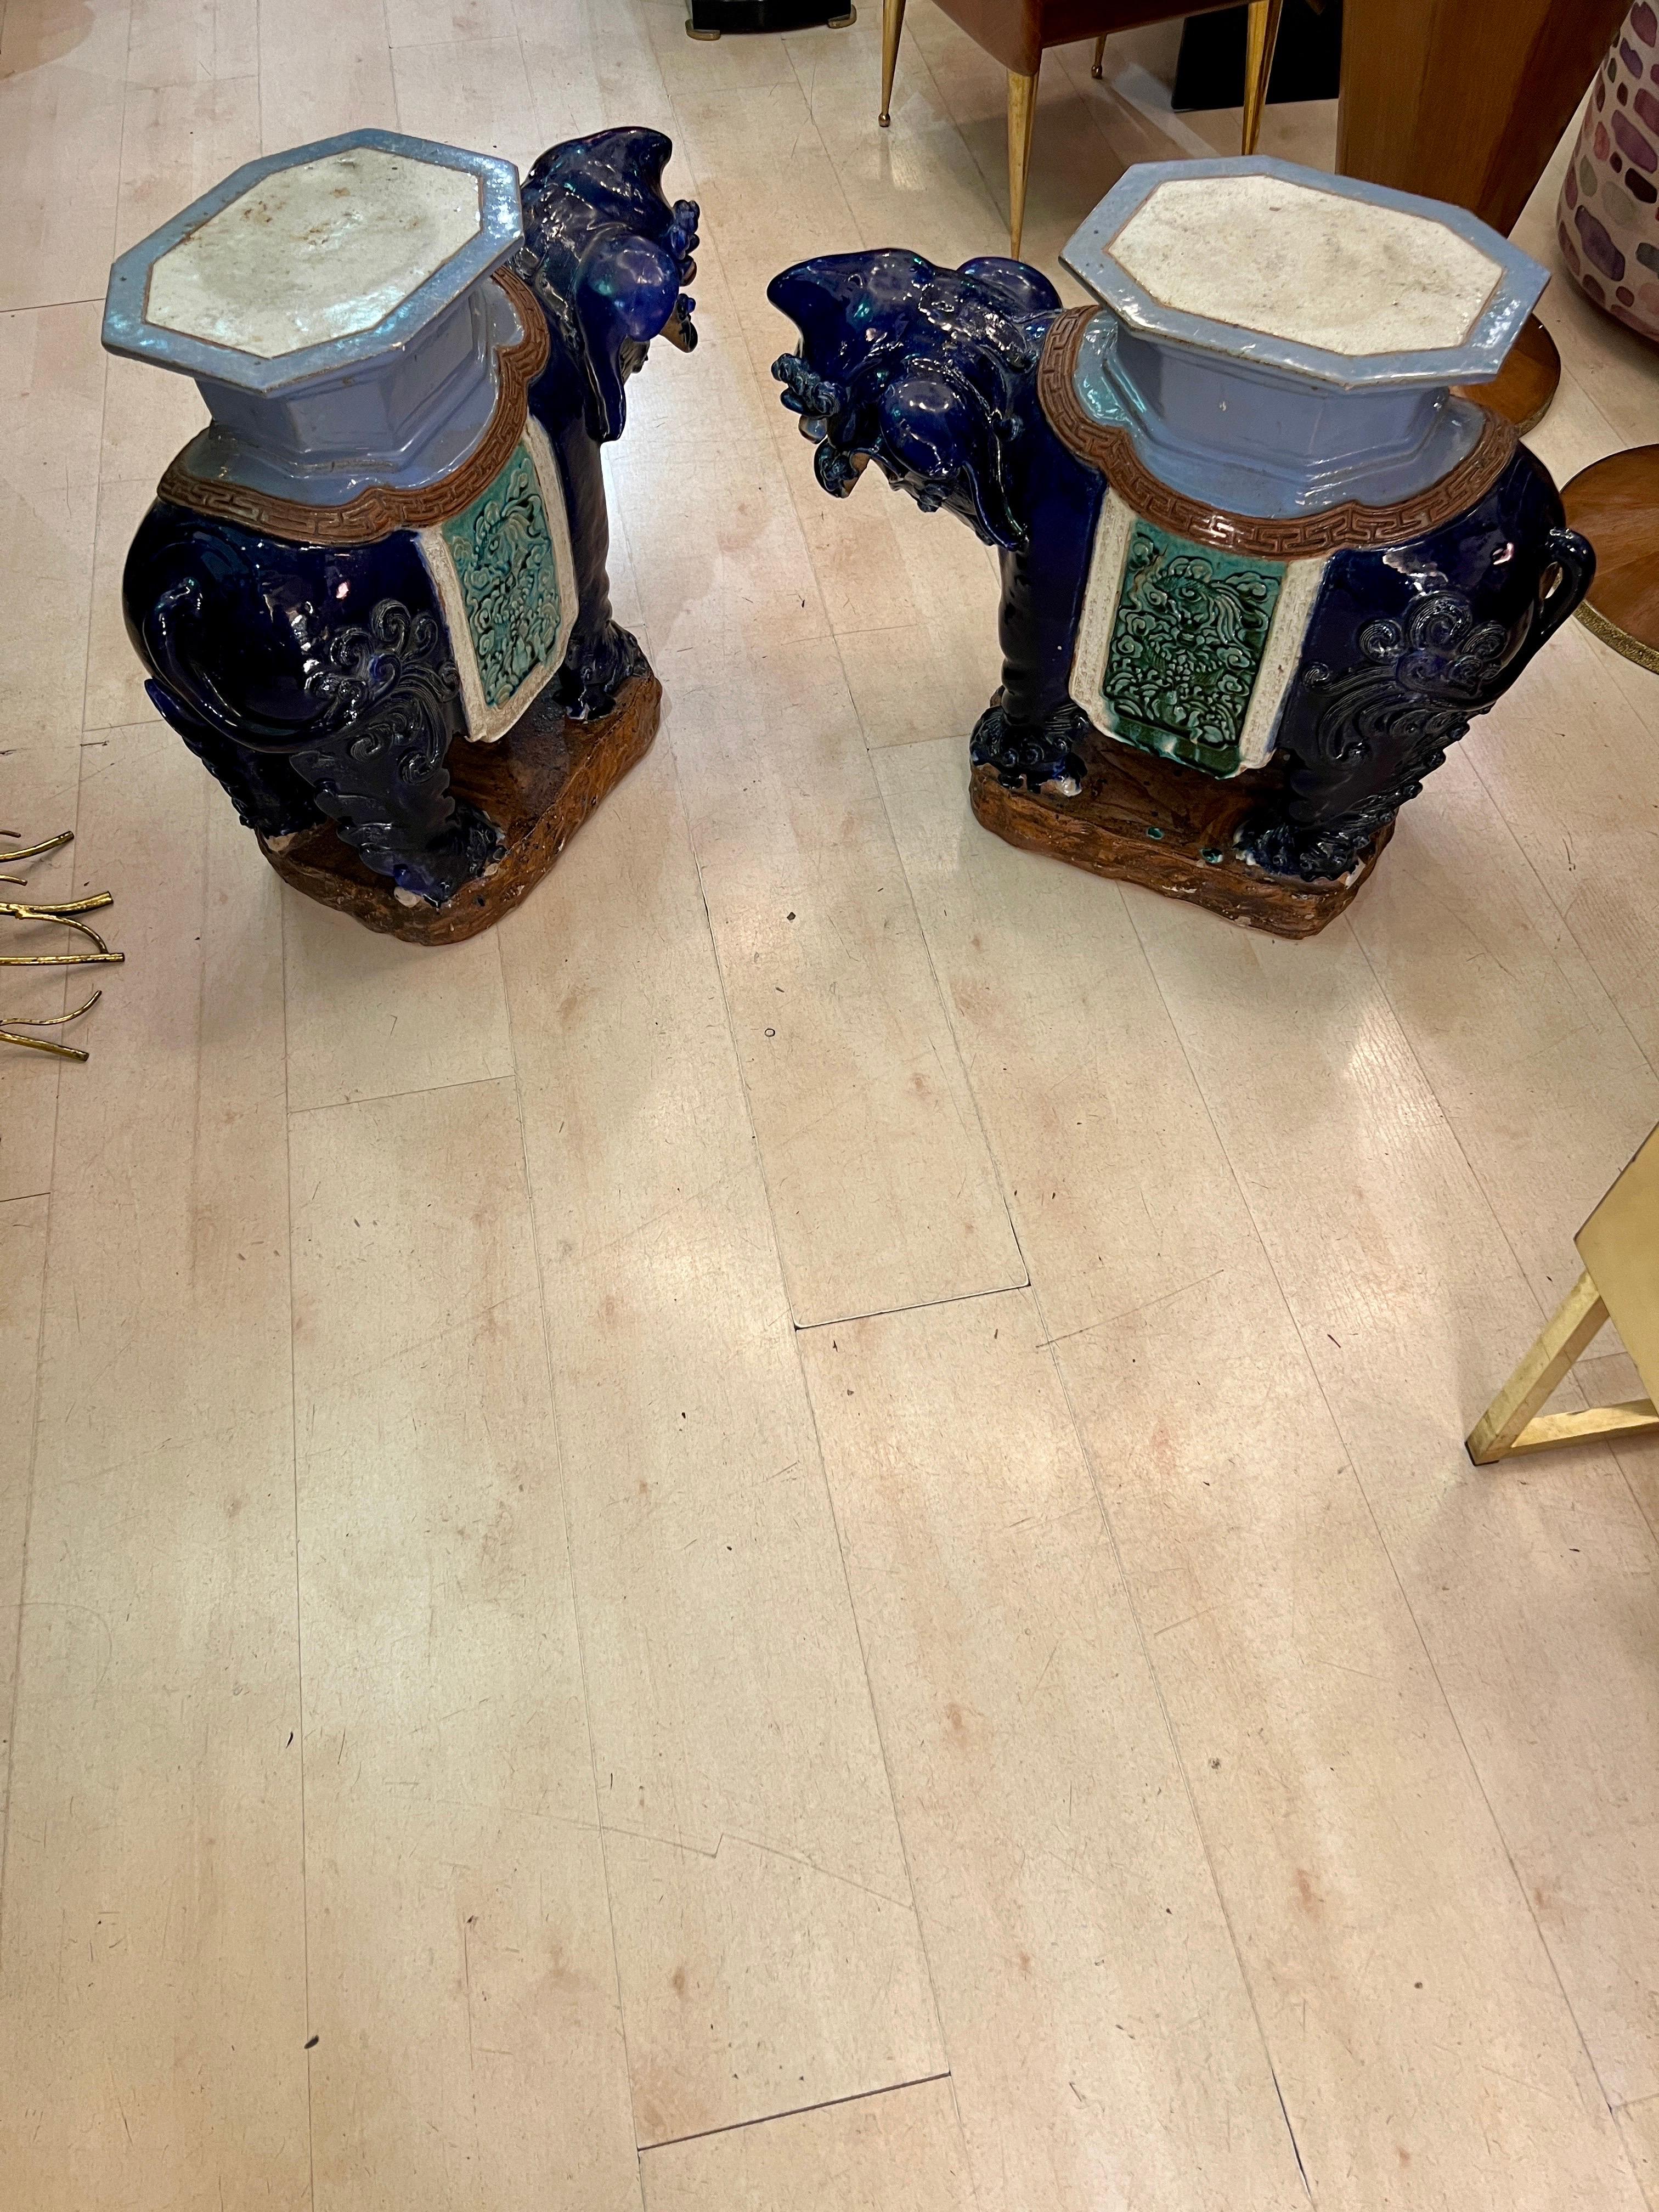 Pair of Vietnamese ceramic vintage Foo Dogs tables / garden plant stands. Excellent condition and made of ceramic. Vivid colors (blue and turquoise) and details.
These are great for indoor and outdoor use. Excellent as end tables, garden statues,